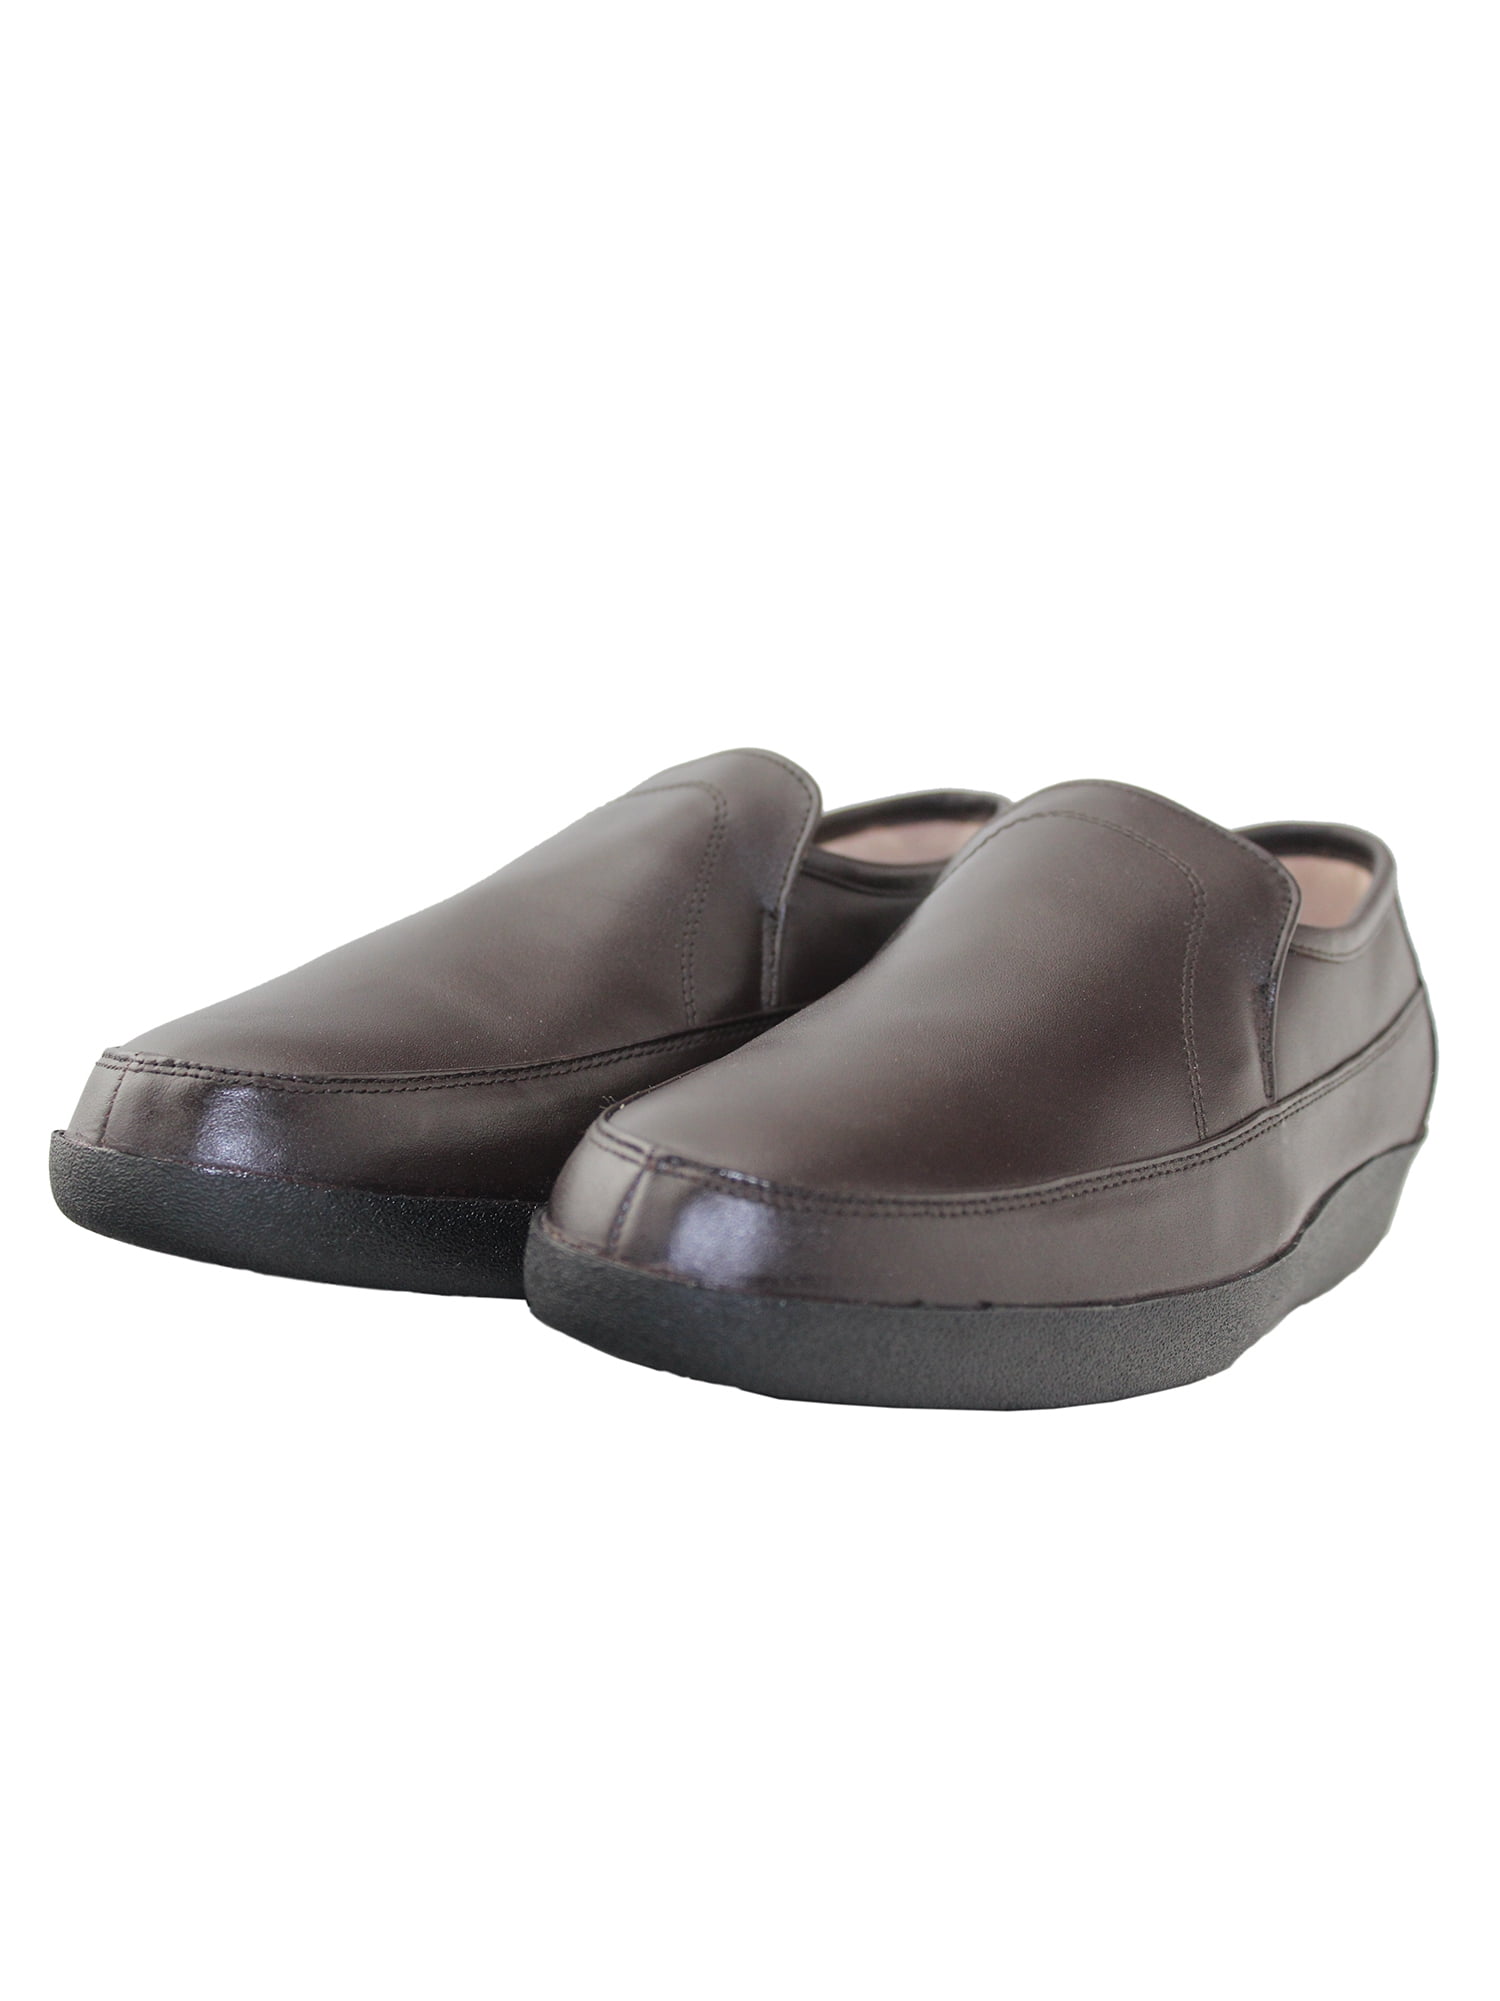 mens wide width casual slip on shoes